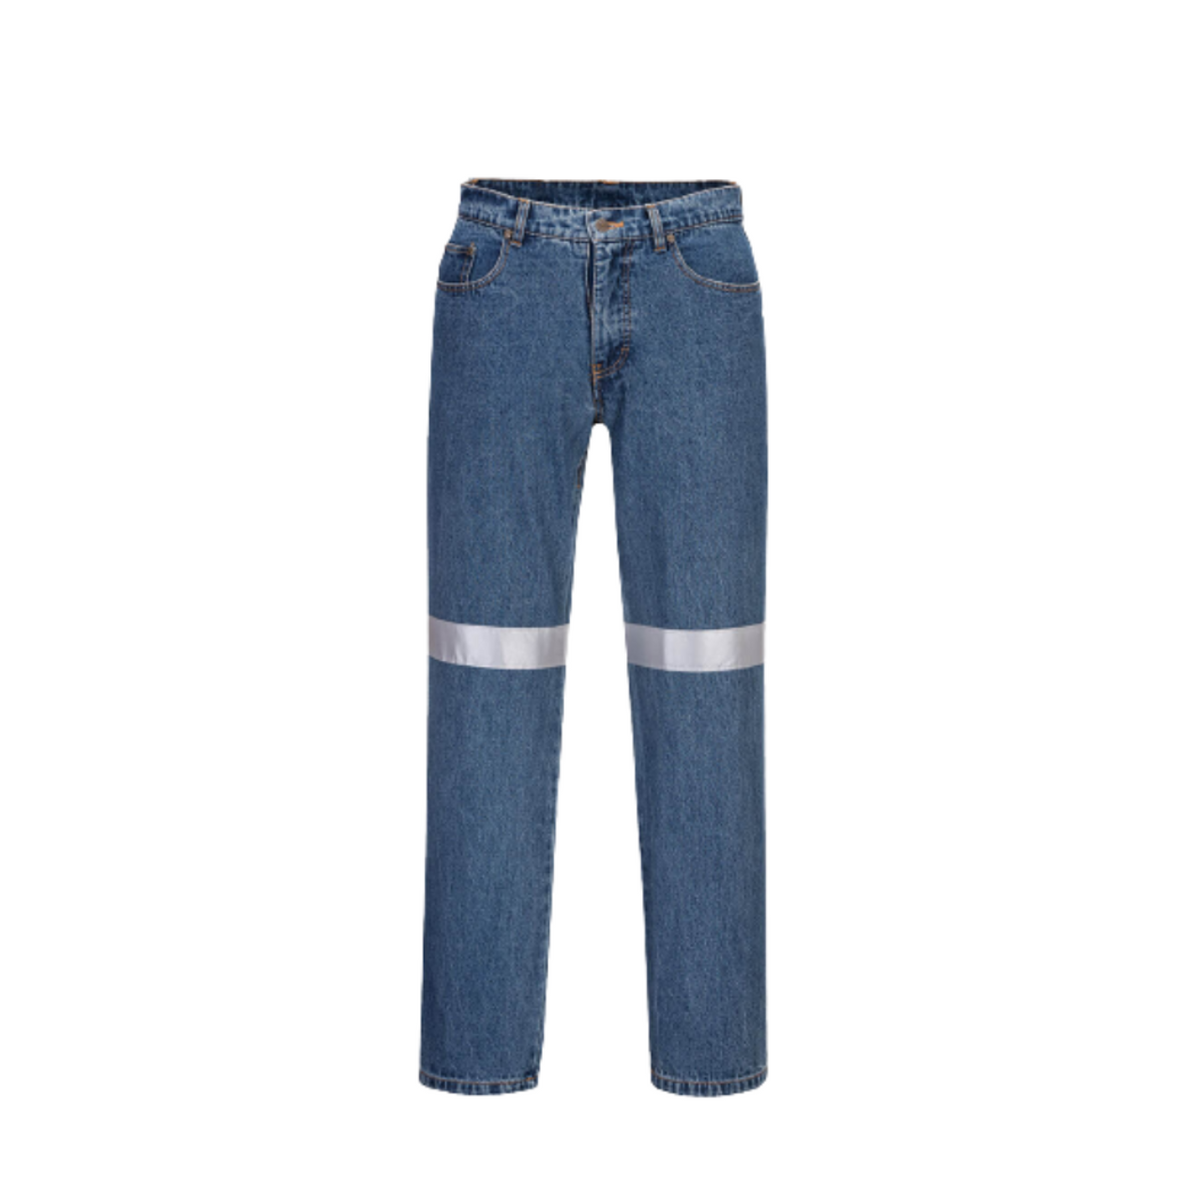 Portwest Denim Pants with Tape Pre Shrunk Reflective Tape Straight Pant MW169-Collins Clothing Co